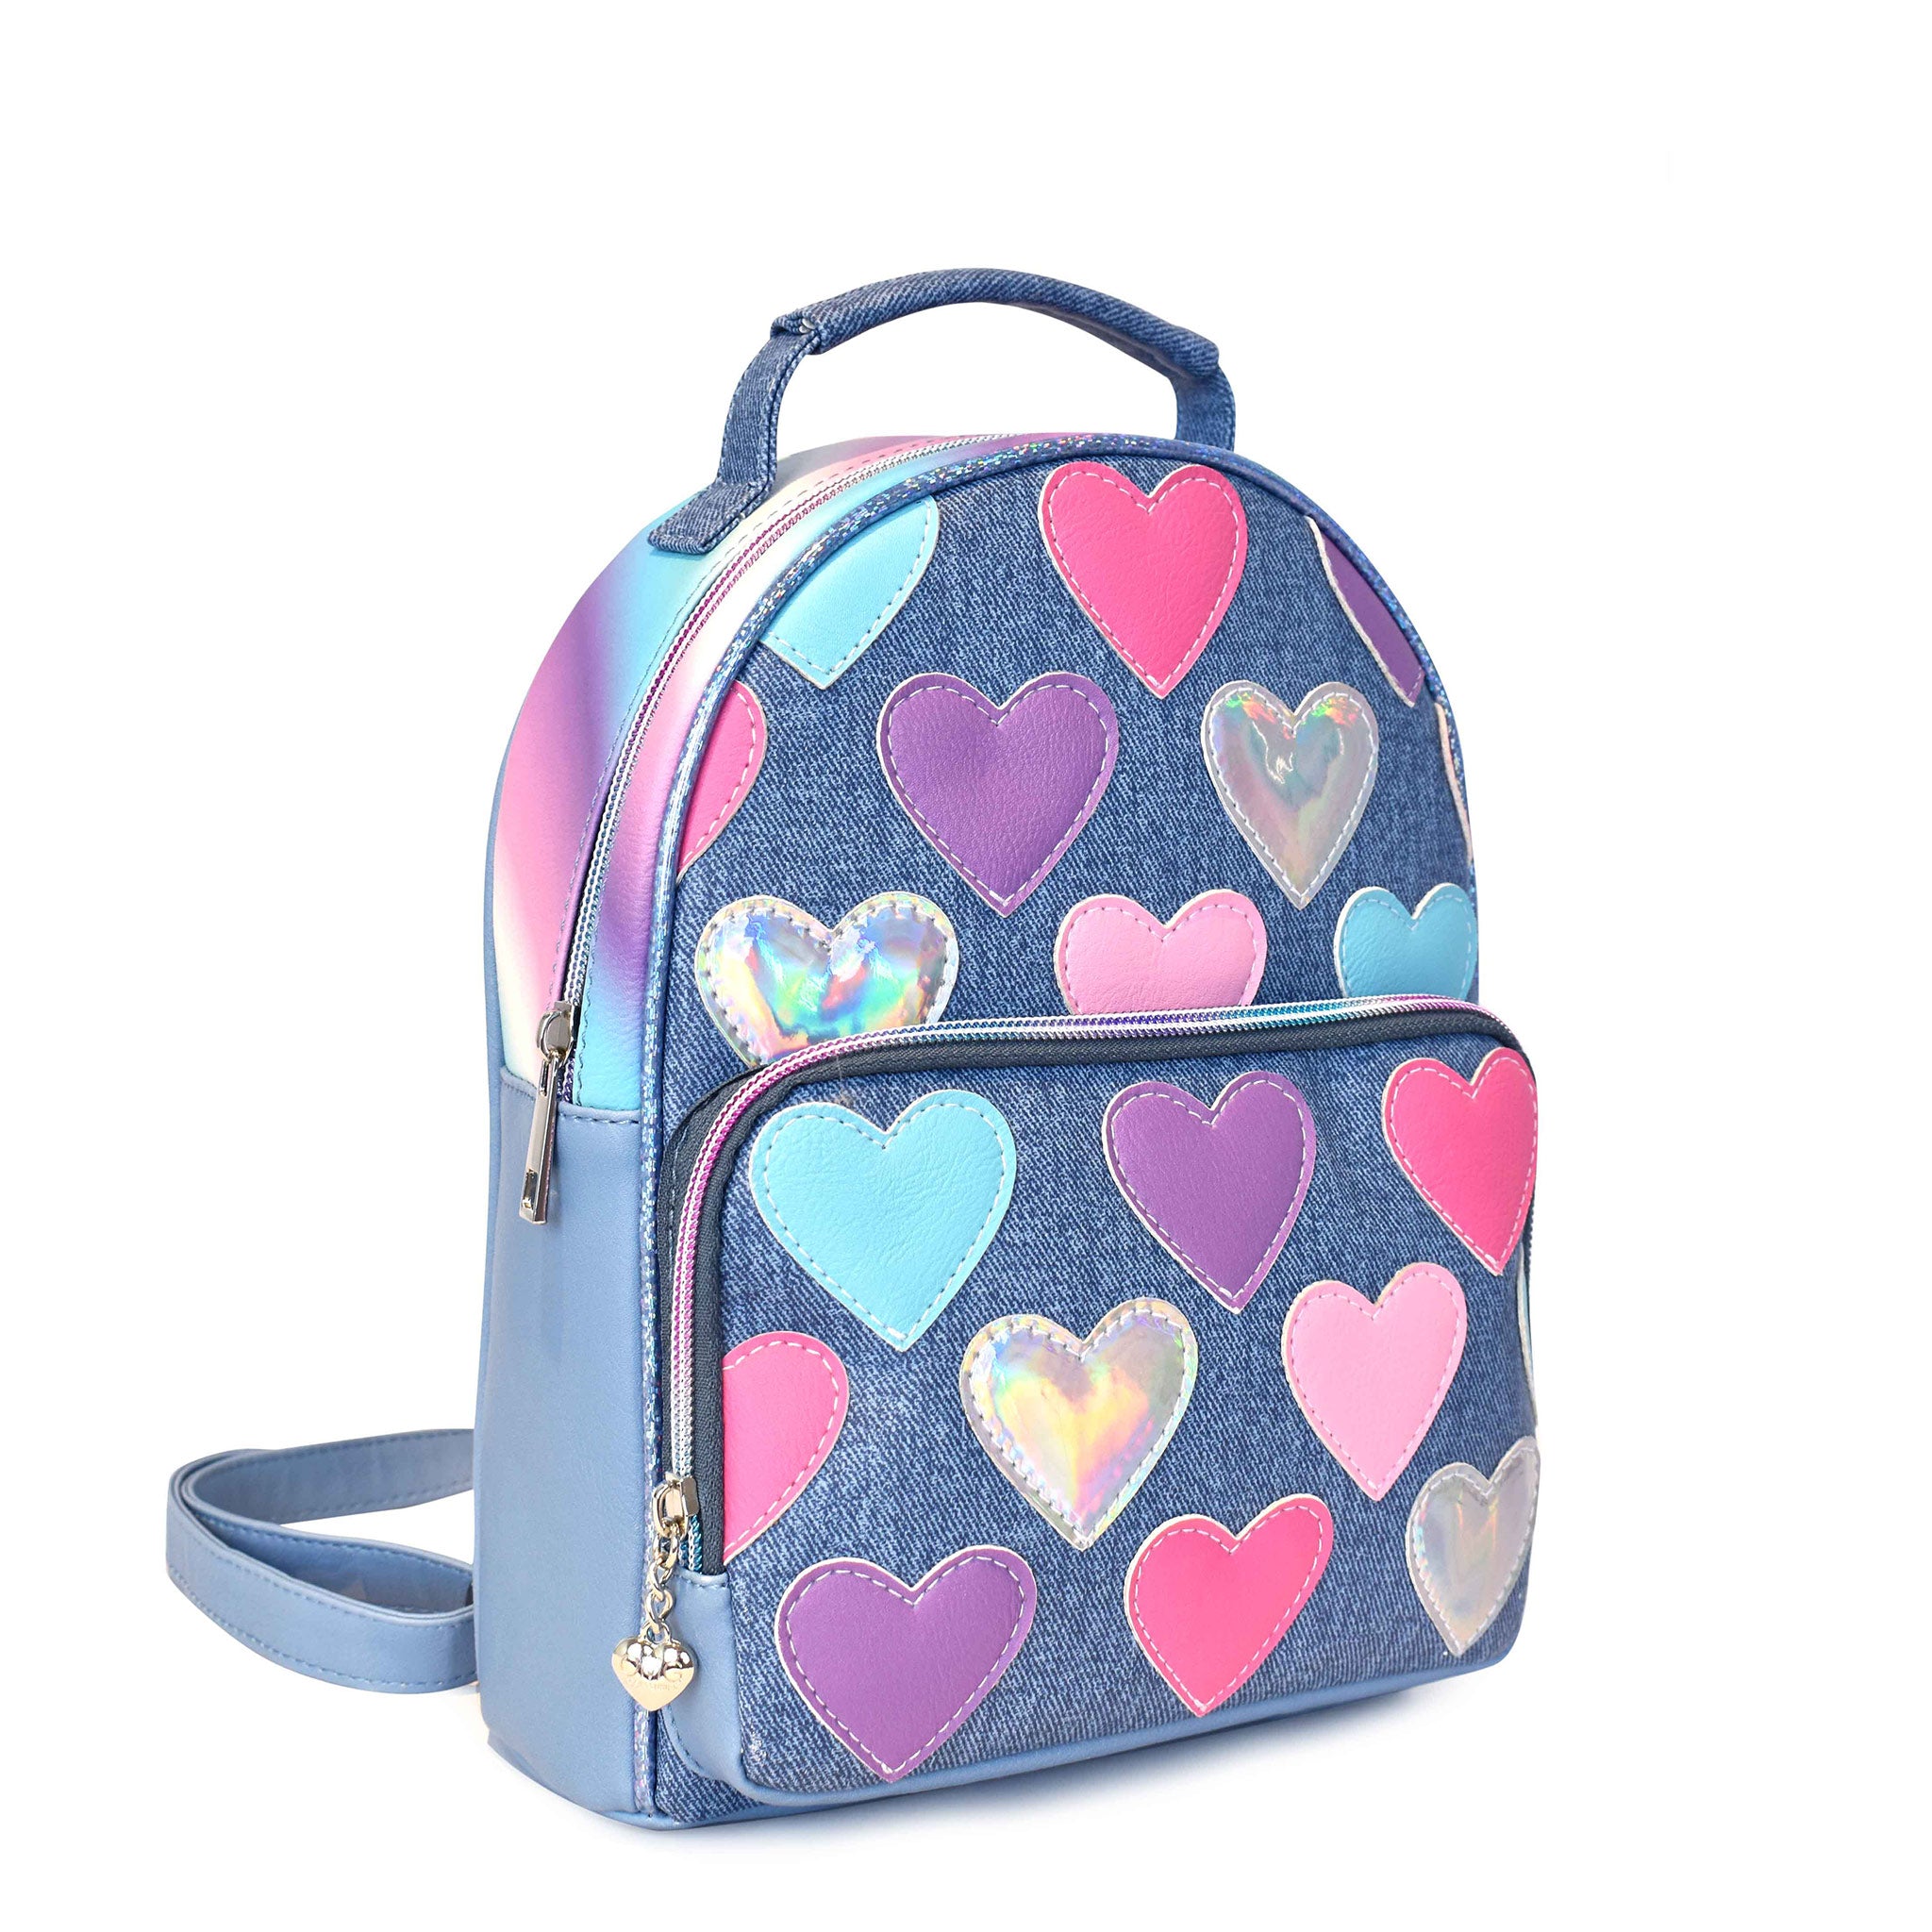 Side view of a denim mini backpack covered in heart patches with a front zipper pocket and top handle